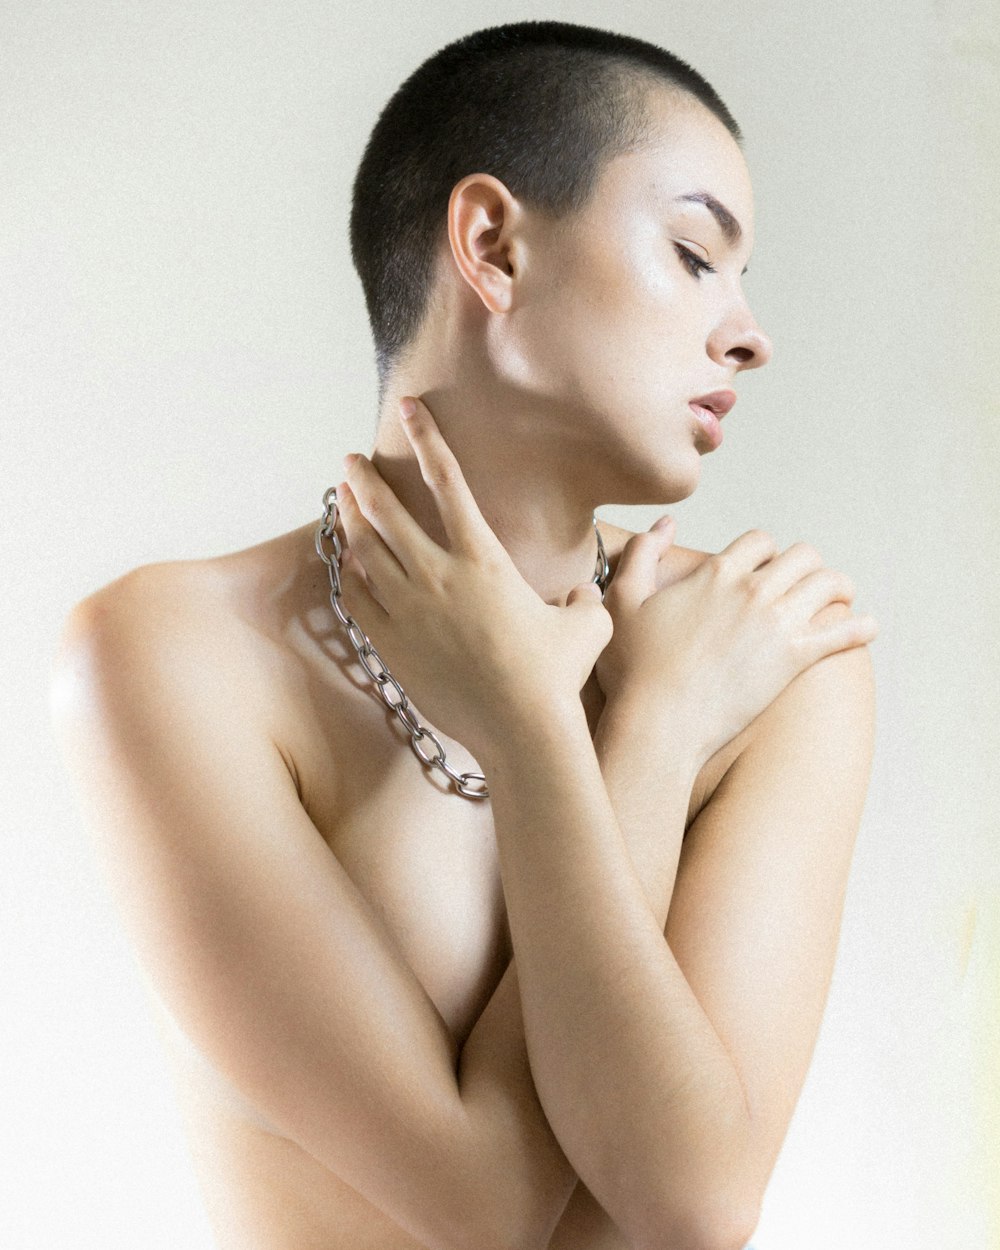 a naked woman with a chain around her neck